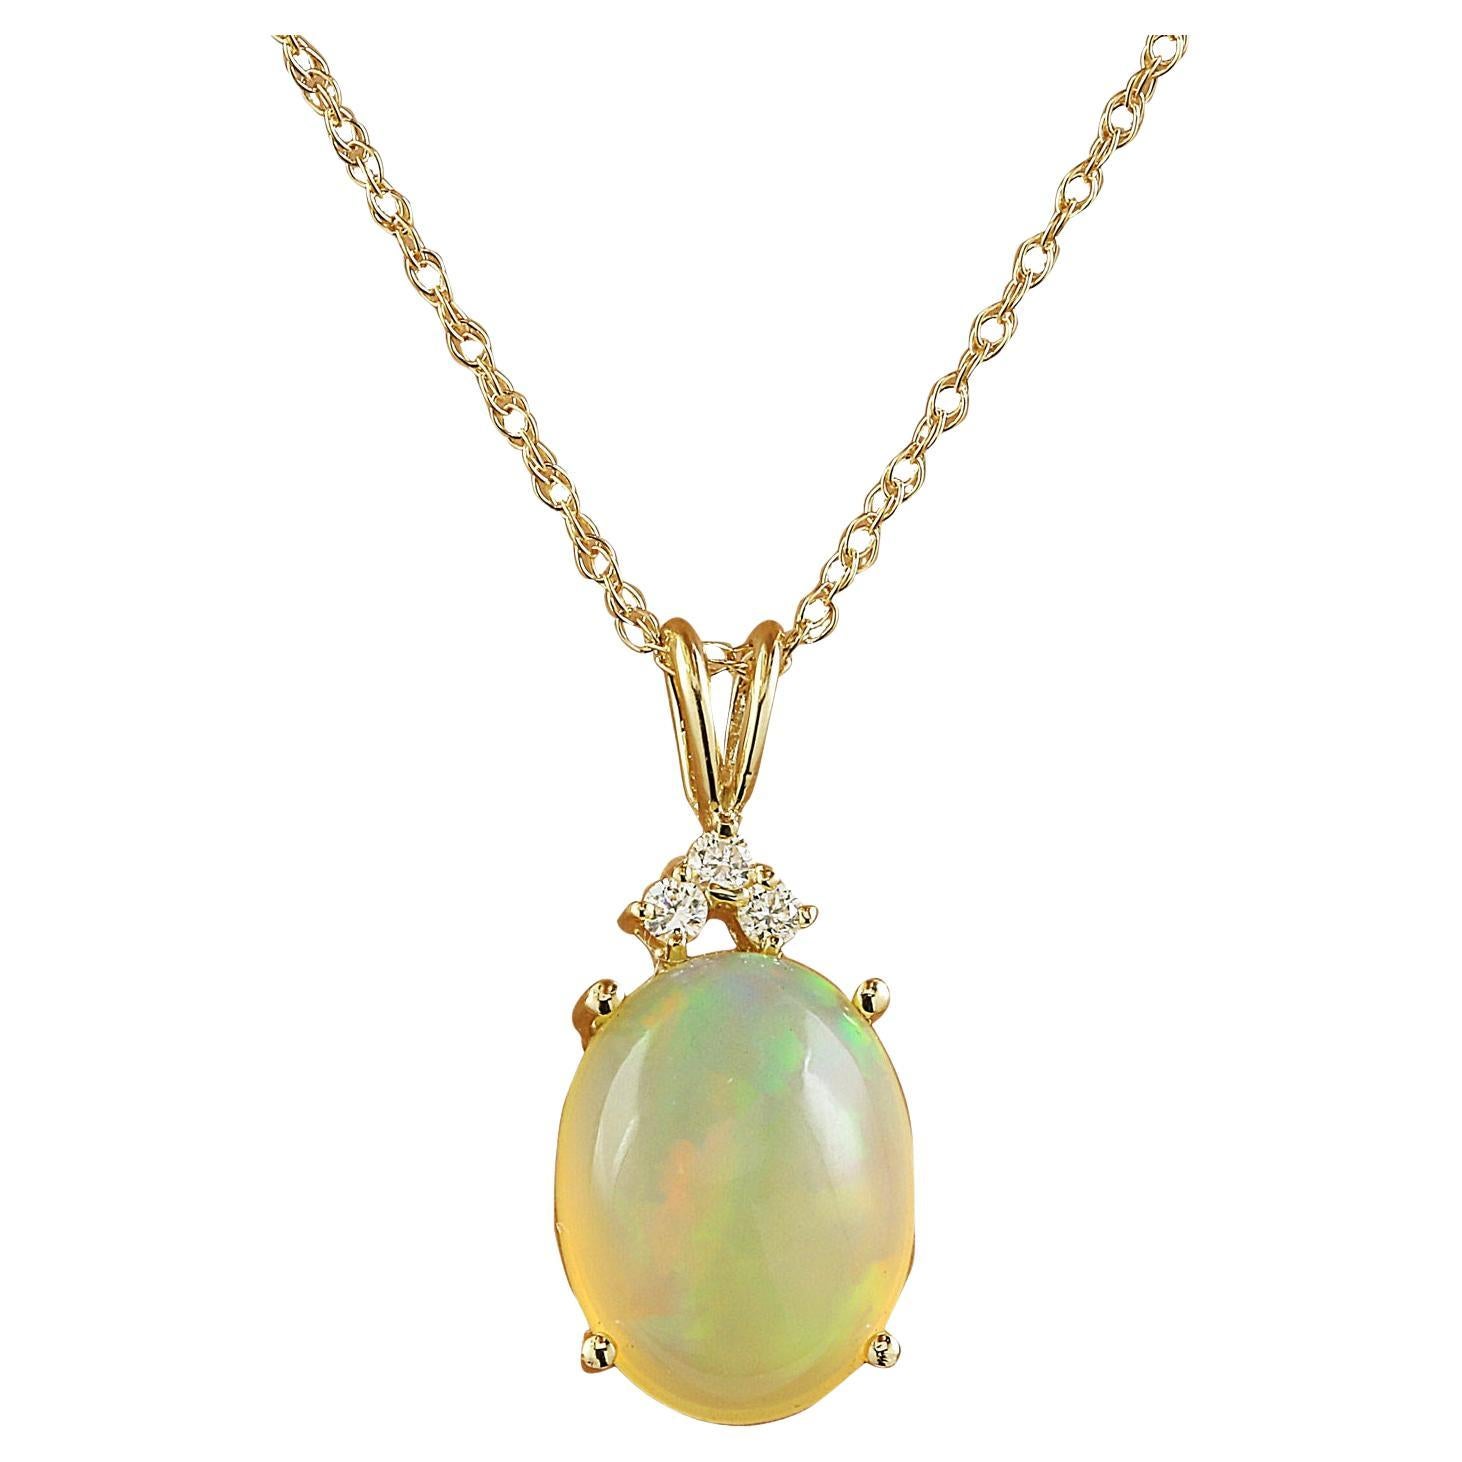 Natural Opal Diamond Necklace in 14 Karat Solid Yellow Gold 